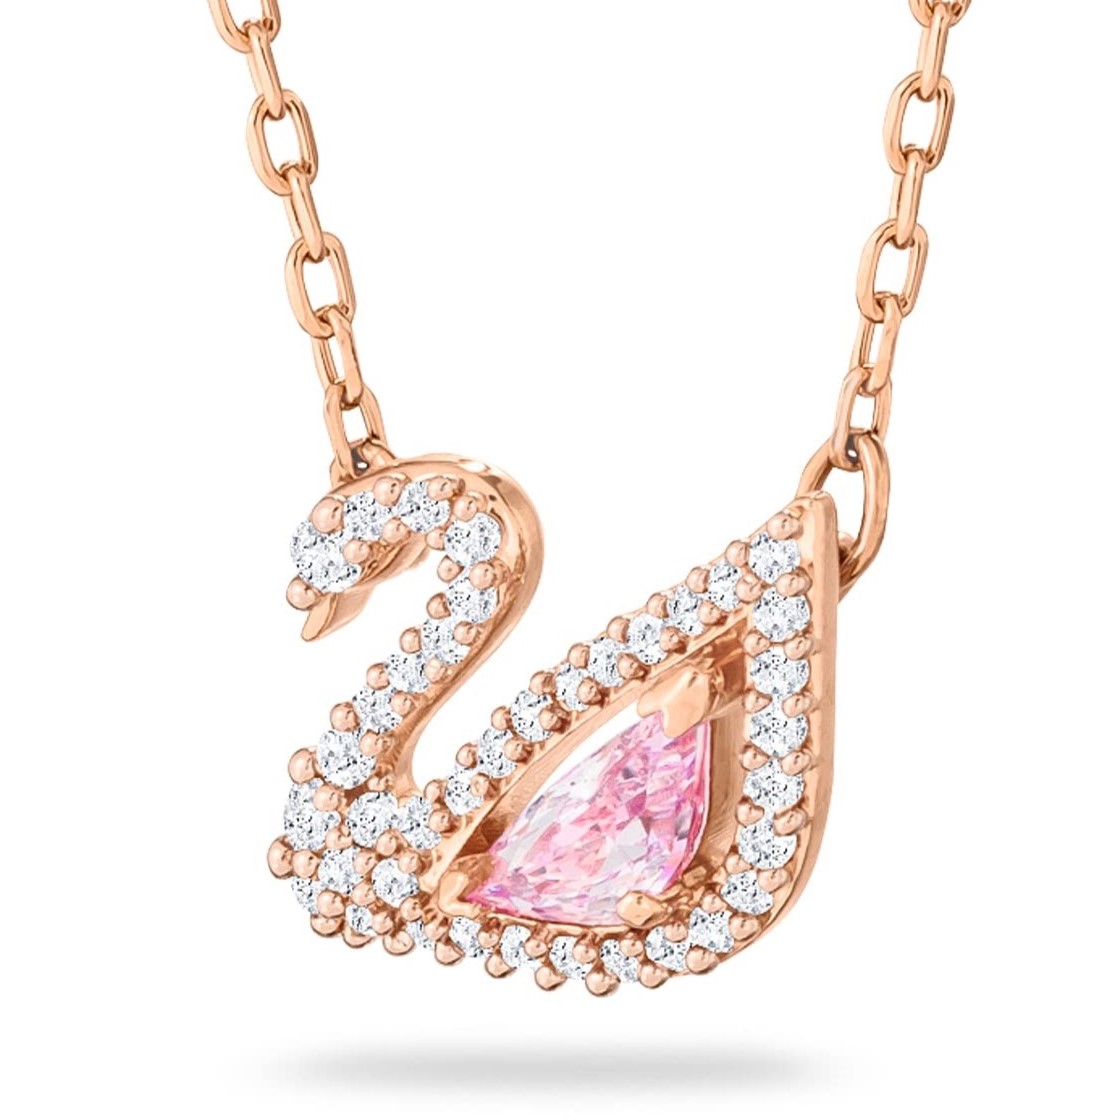 SET DÂY CHUYỀN VÒNG ĐEO TAY SWAROVSKI DAZZLING SWAN NECKLACE MULTI-COLORED ROSE-GOLD TONE PLATED 5469989 9